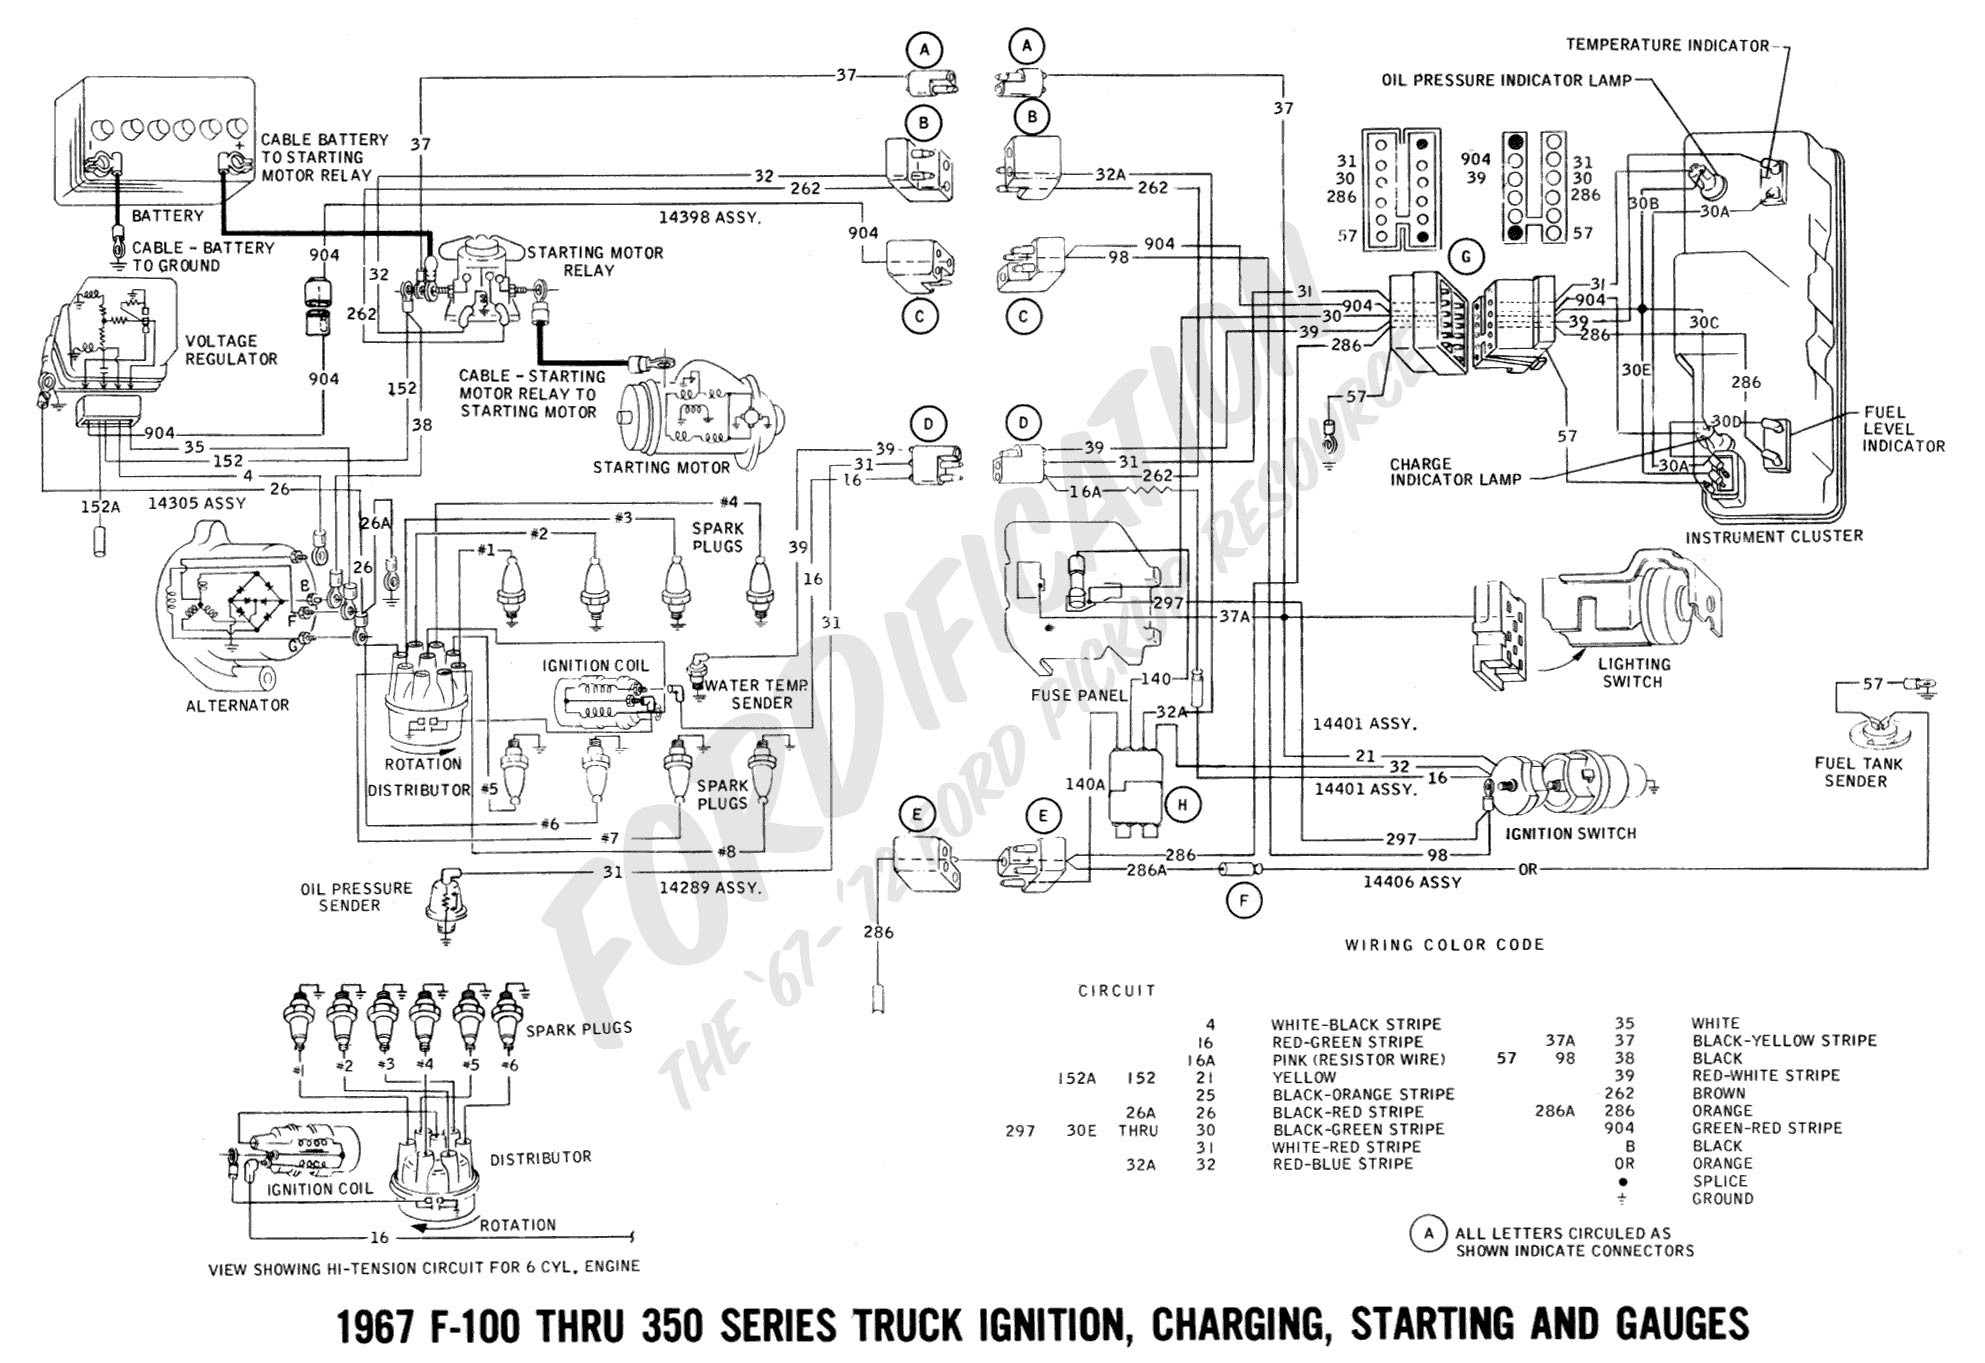 2000 ford Expedition Engine Diagram Well ford F 350 Wiring Diagram 1968 ford Mustang Fuse Box Diagram Of 2000 ford Expedition Engine Diagram